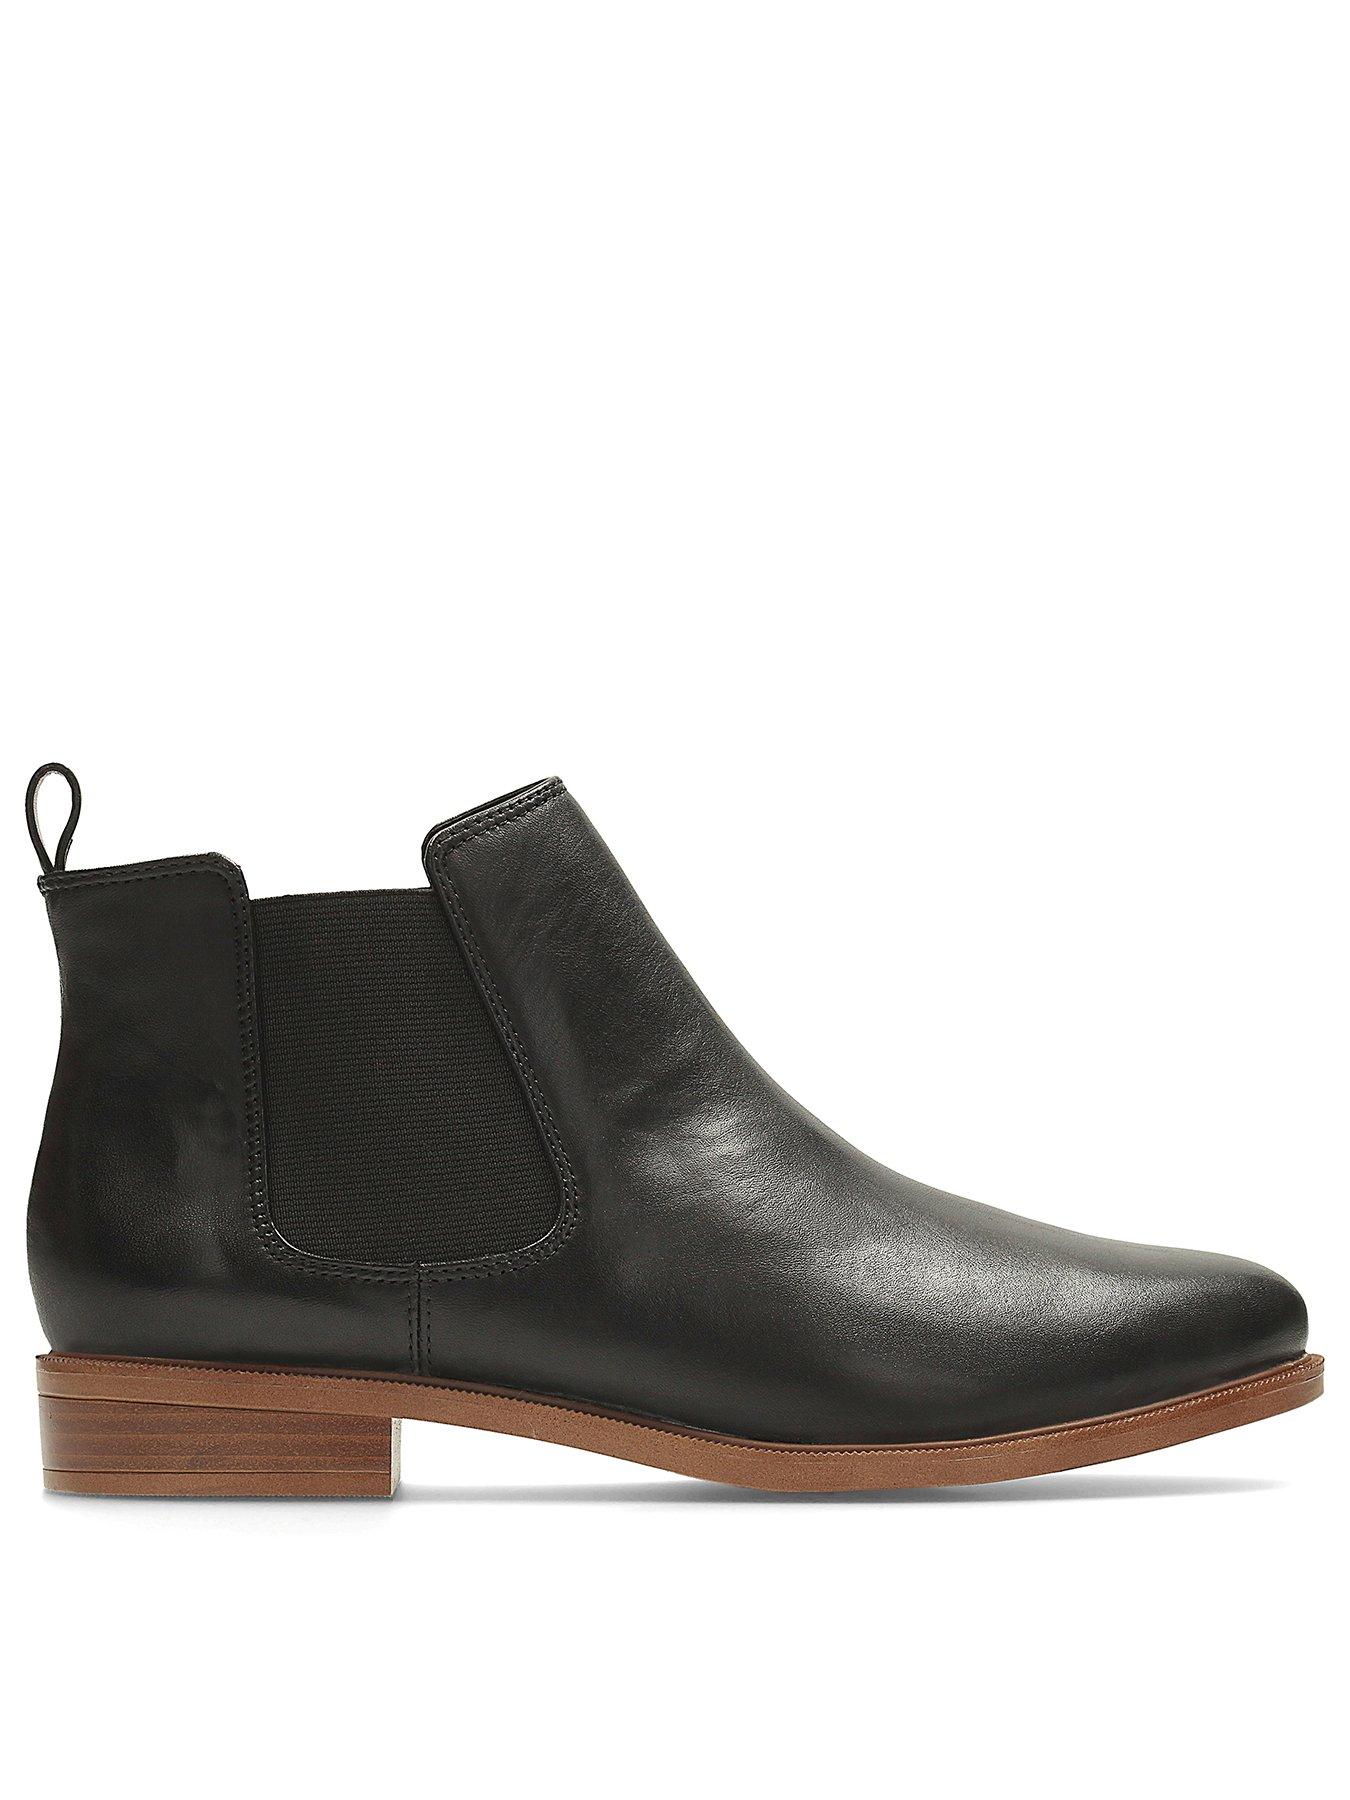 Ankle Boots : Versatile Anna Field Ireland, Anna field dresses are suitable  for every woman.